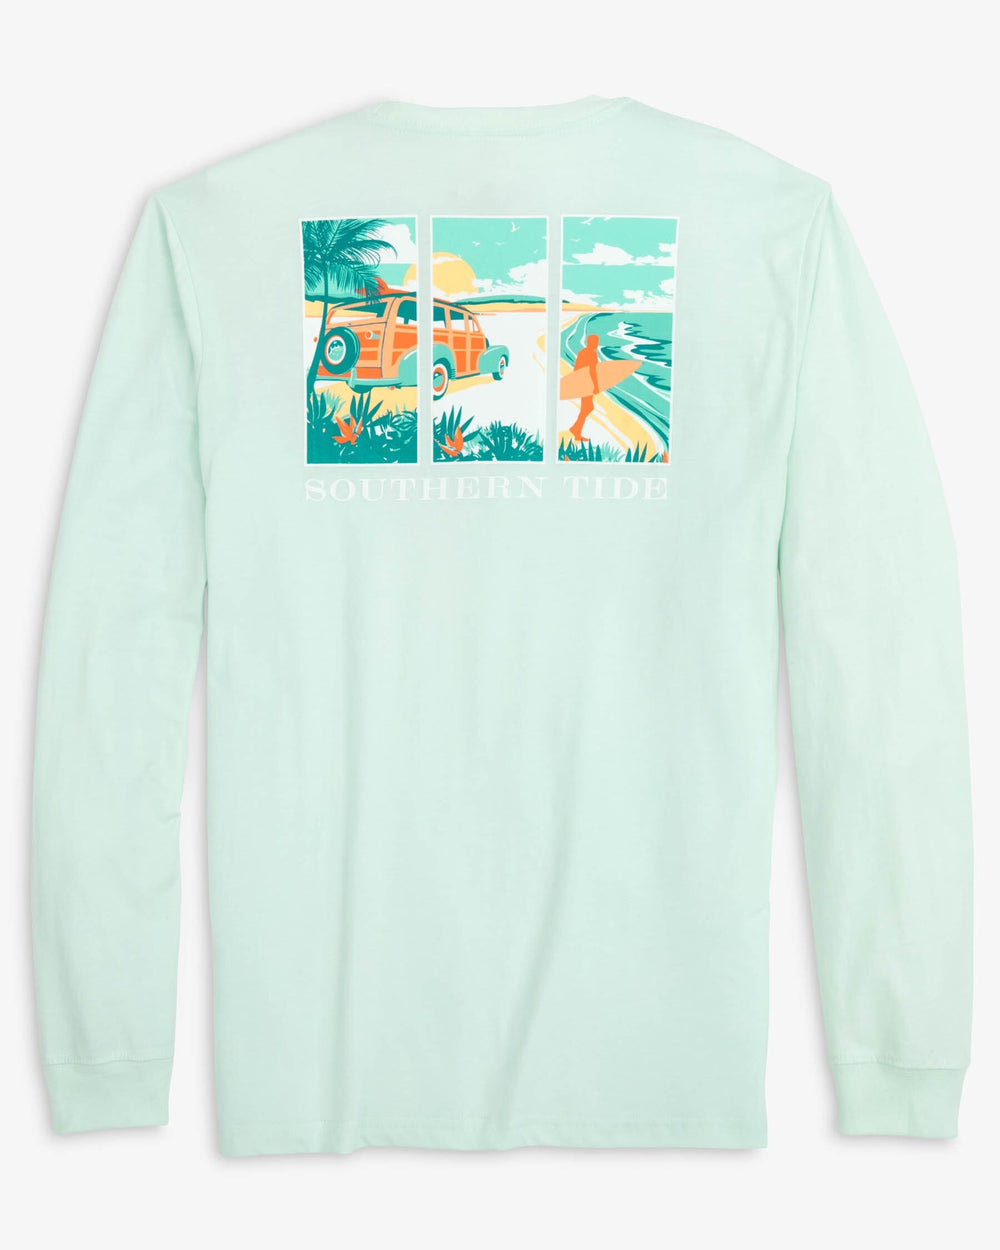 The back view of the Southern Tide Coastal Triptych Long Sleeve T-Shirt by Southern Tide - Turquoise Mist